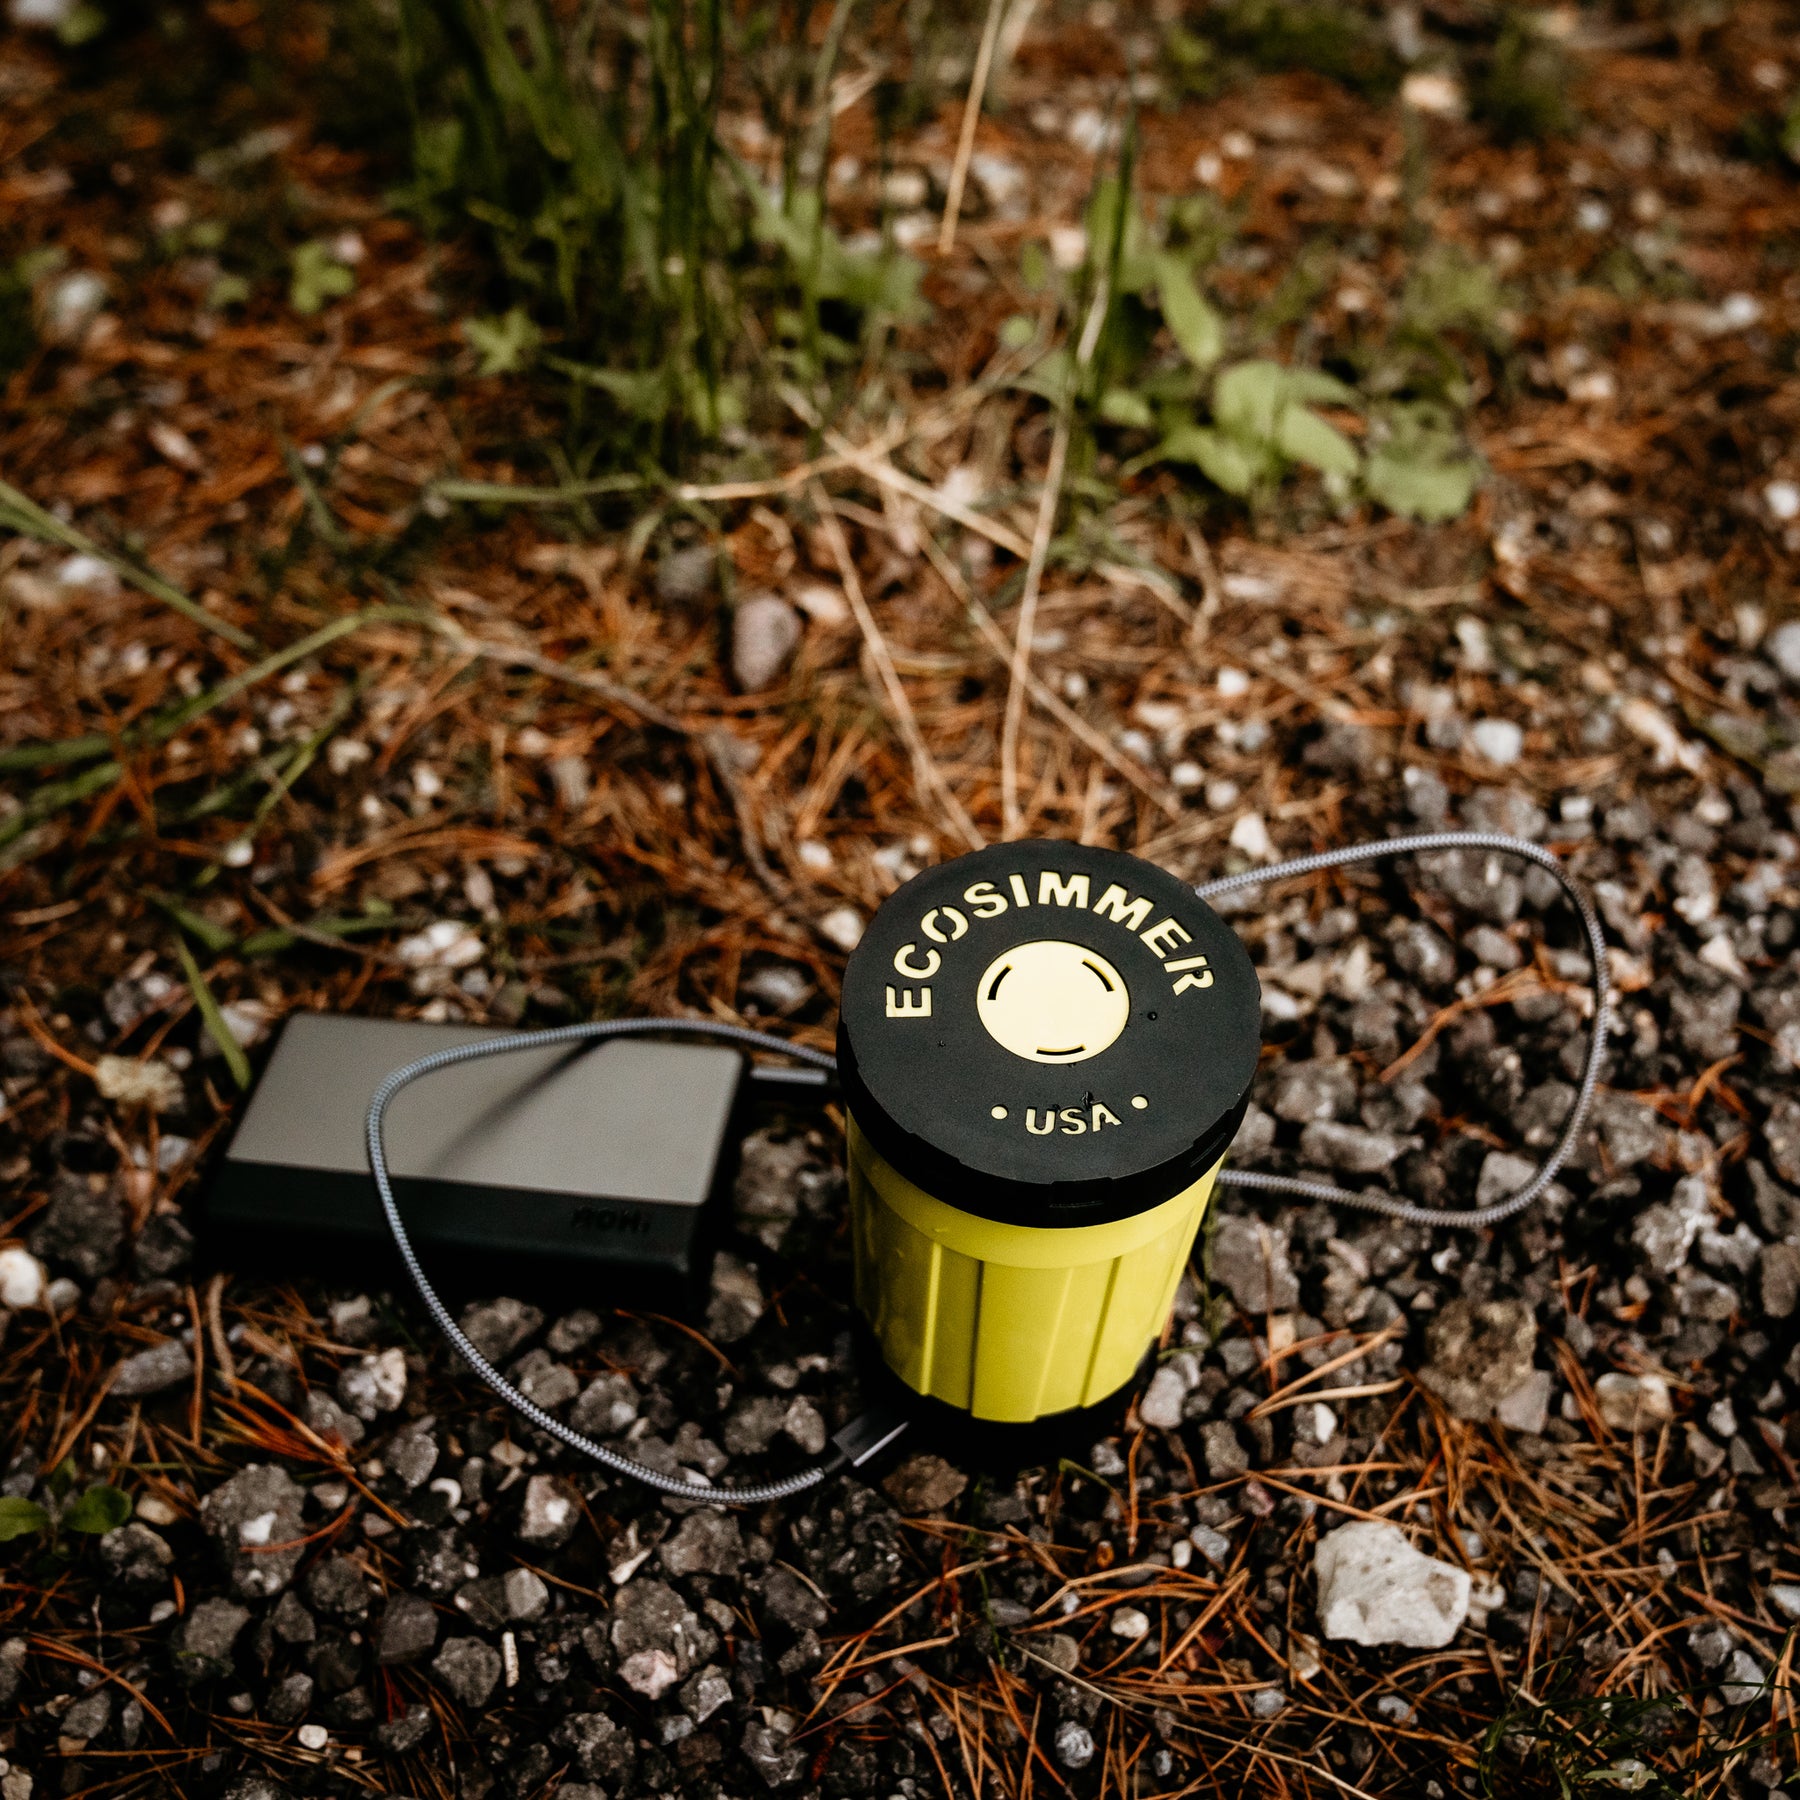 Introducing EcoSimmer: A Portable, Lightweight, Electric Camping Stove